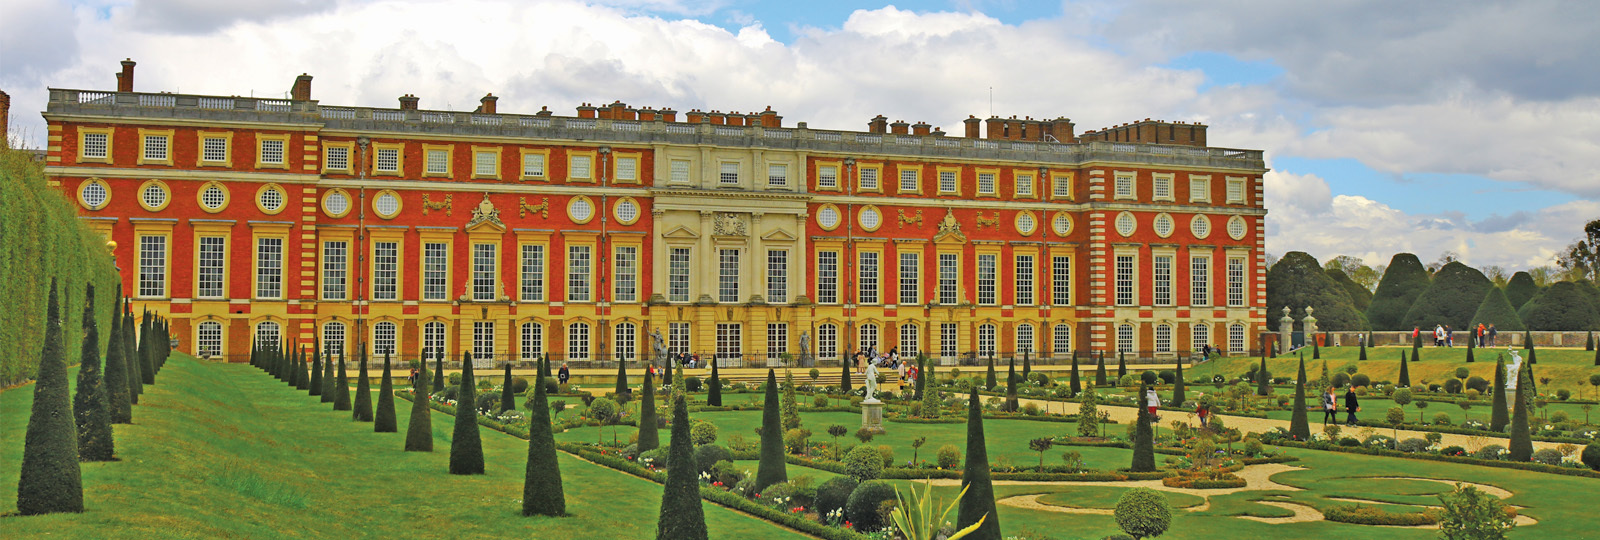 The East Front, Hampton Court Palace